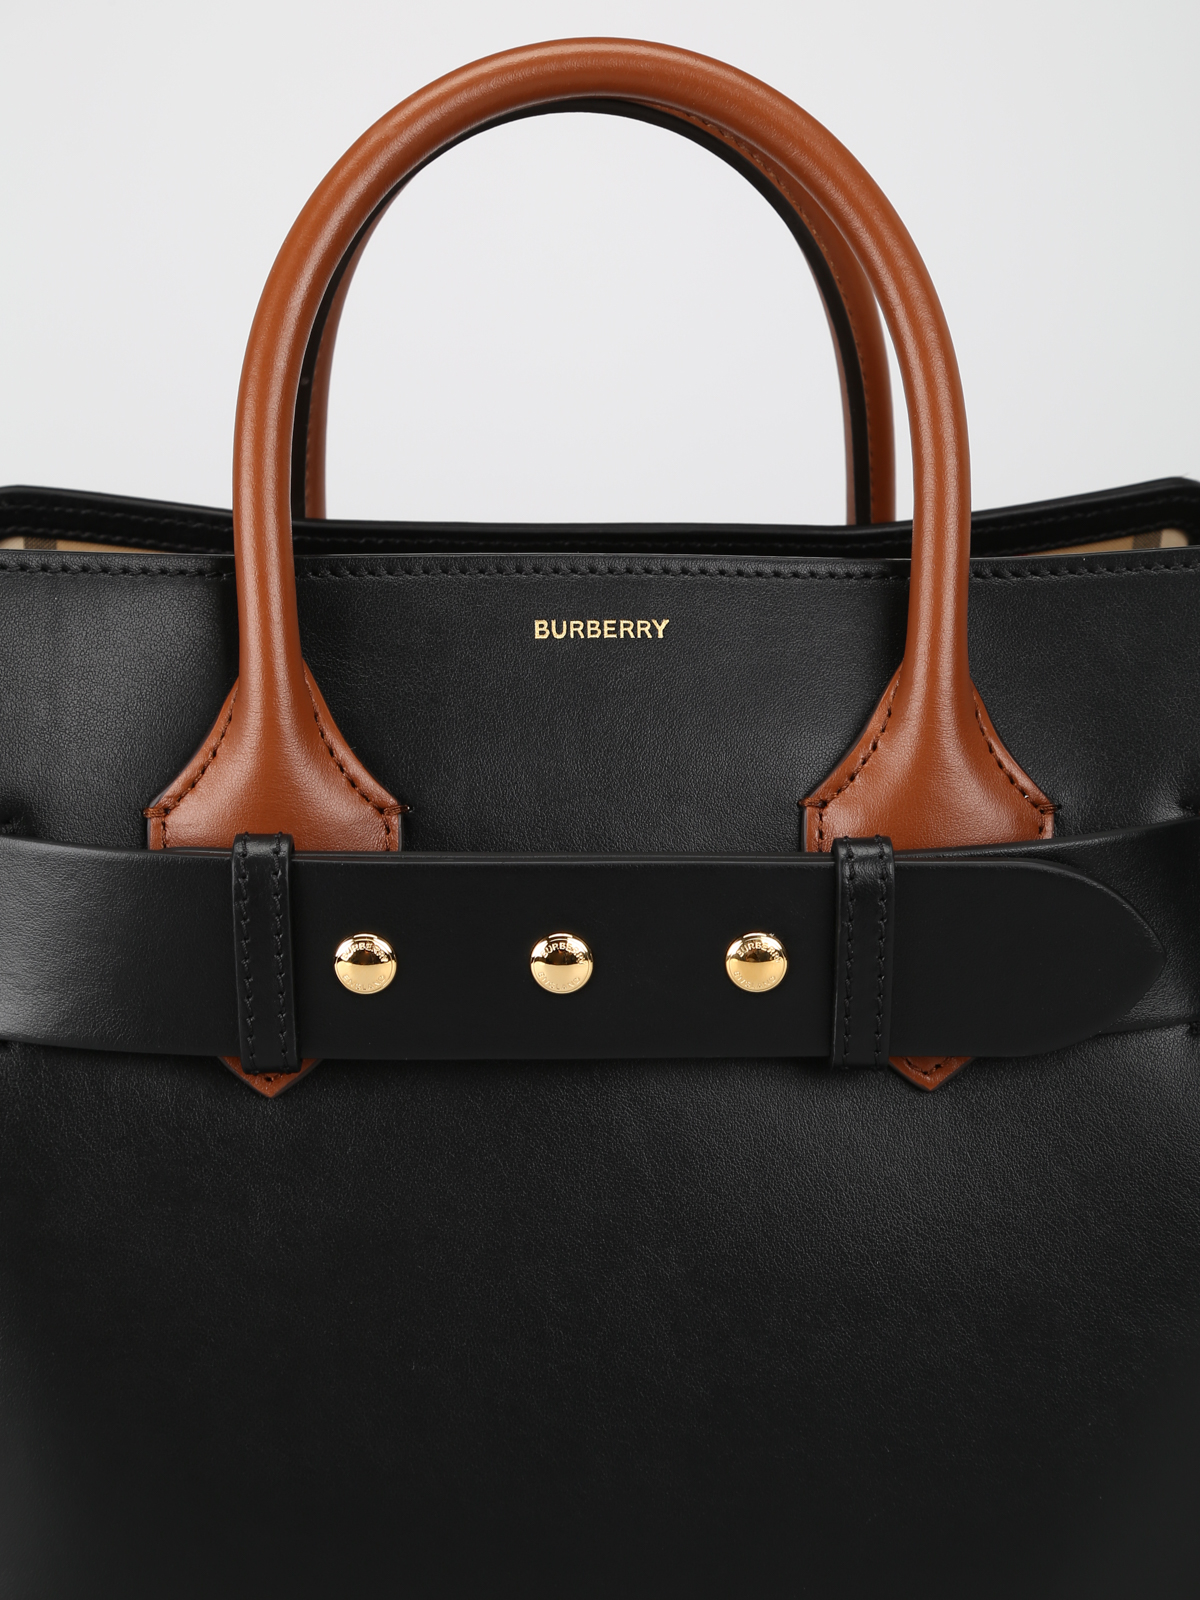 Totes bags Burberry - Belt Bag black leather small tote - 8015903